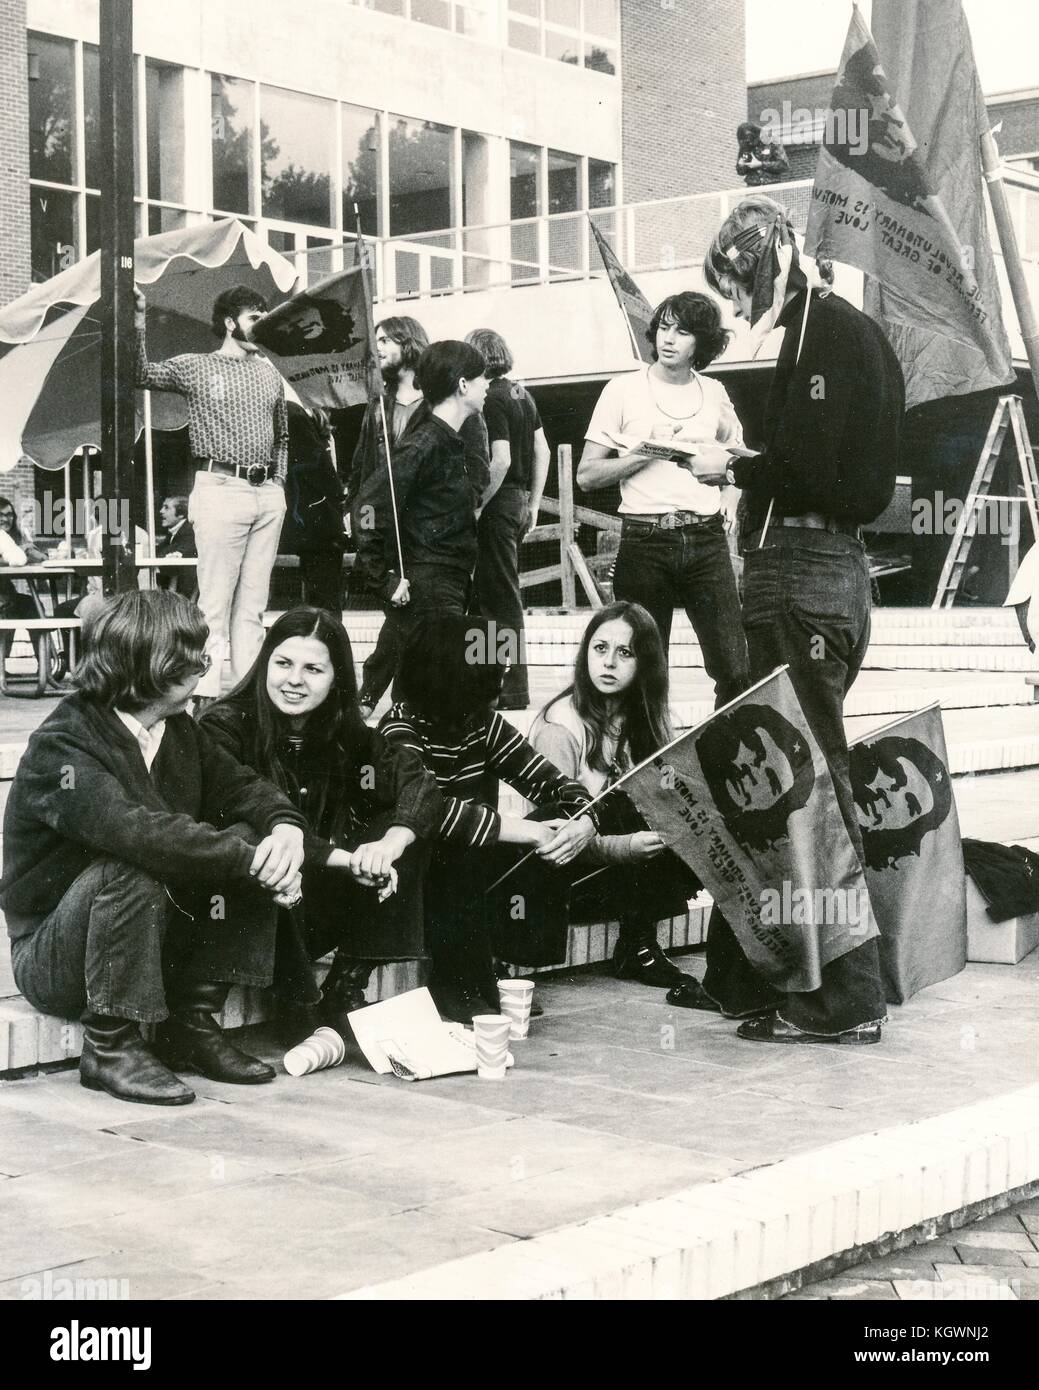 Students dressed in hippie attire sit on the steps of a campus building holding flags with the exhiled guerilla leader Che Guevara, part of a student sit-in protest against the Vietnam War and United States action in Cambodia, at North Carola State University, Raleigh, North Carolina, 1970. Stock Photo